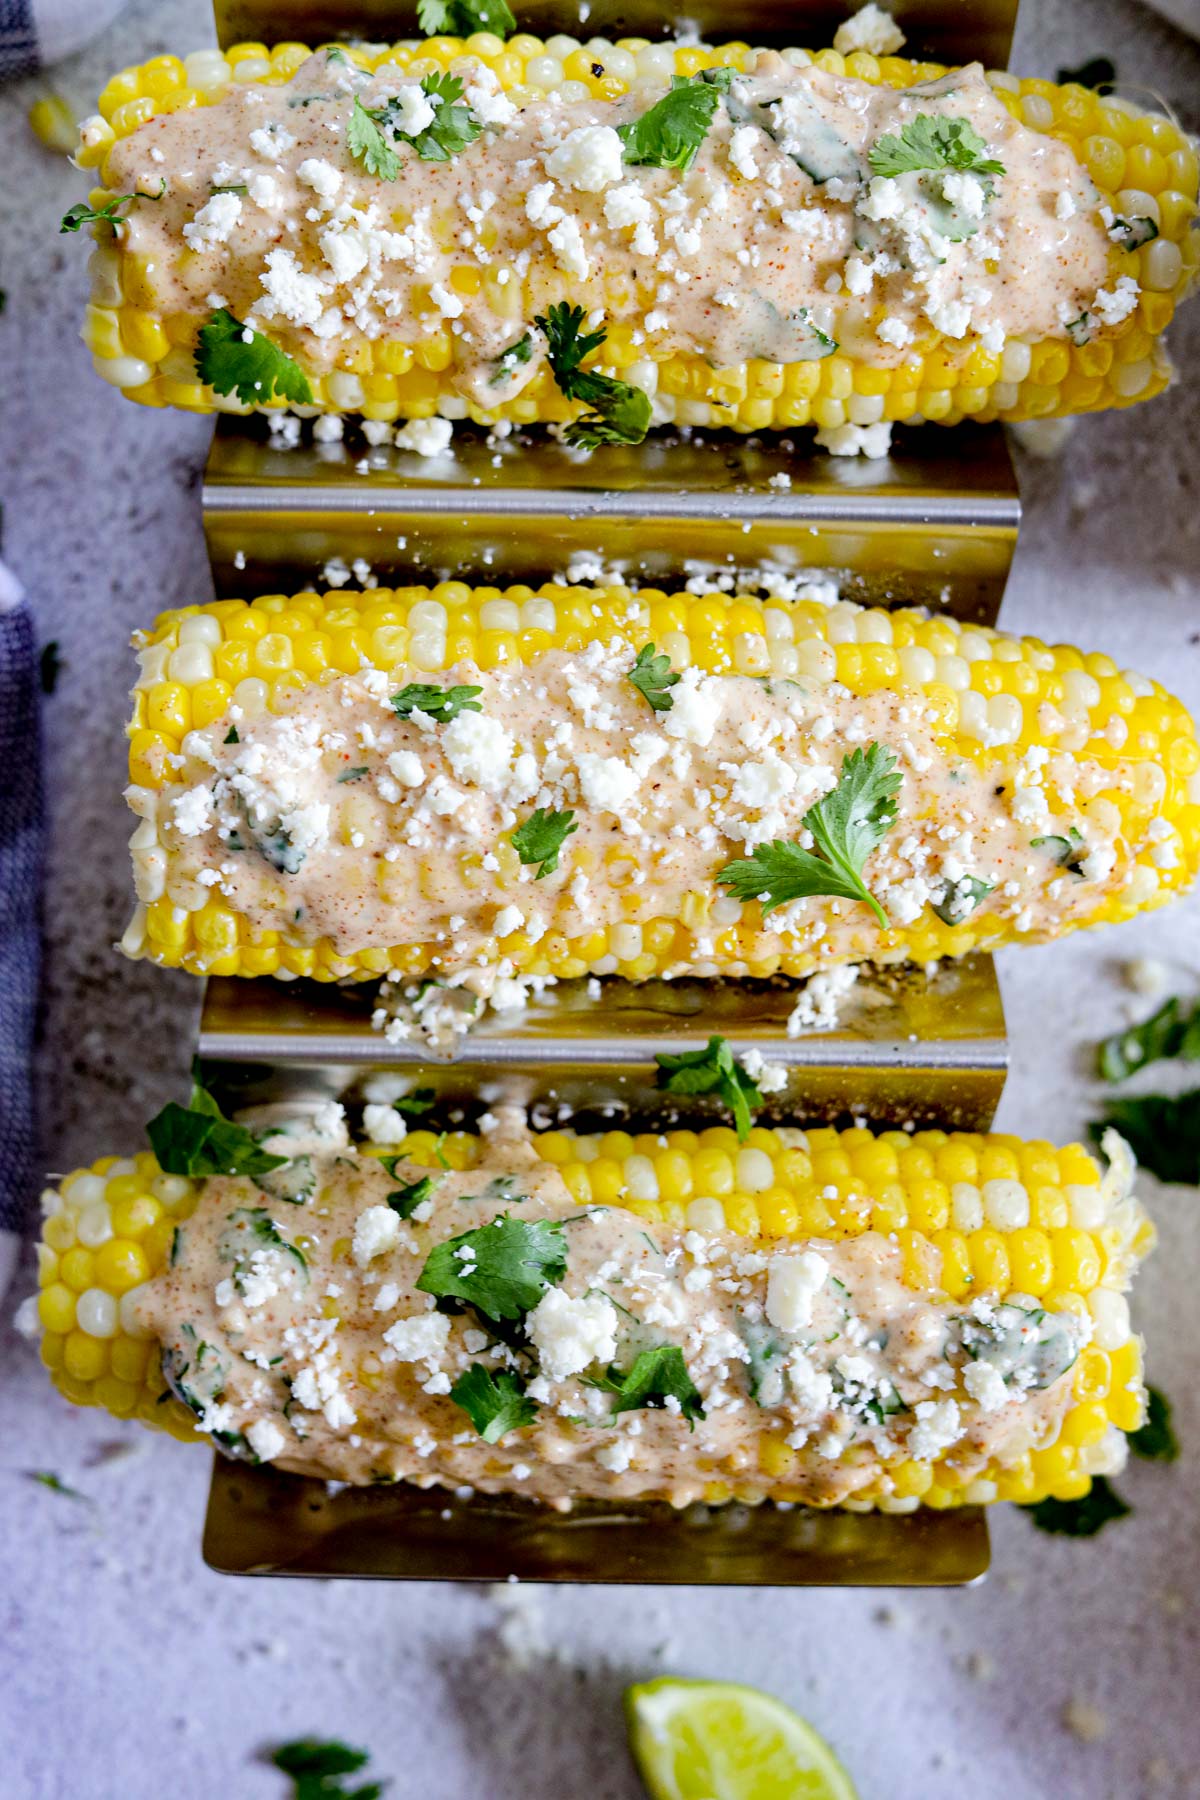 three ears of corn with cream sauce, cilantro and crumbled cheese